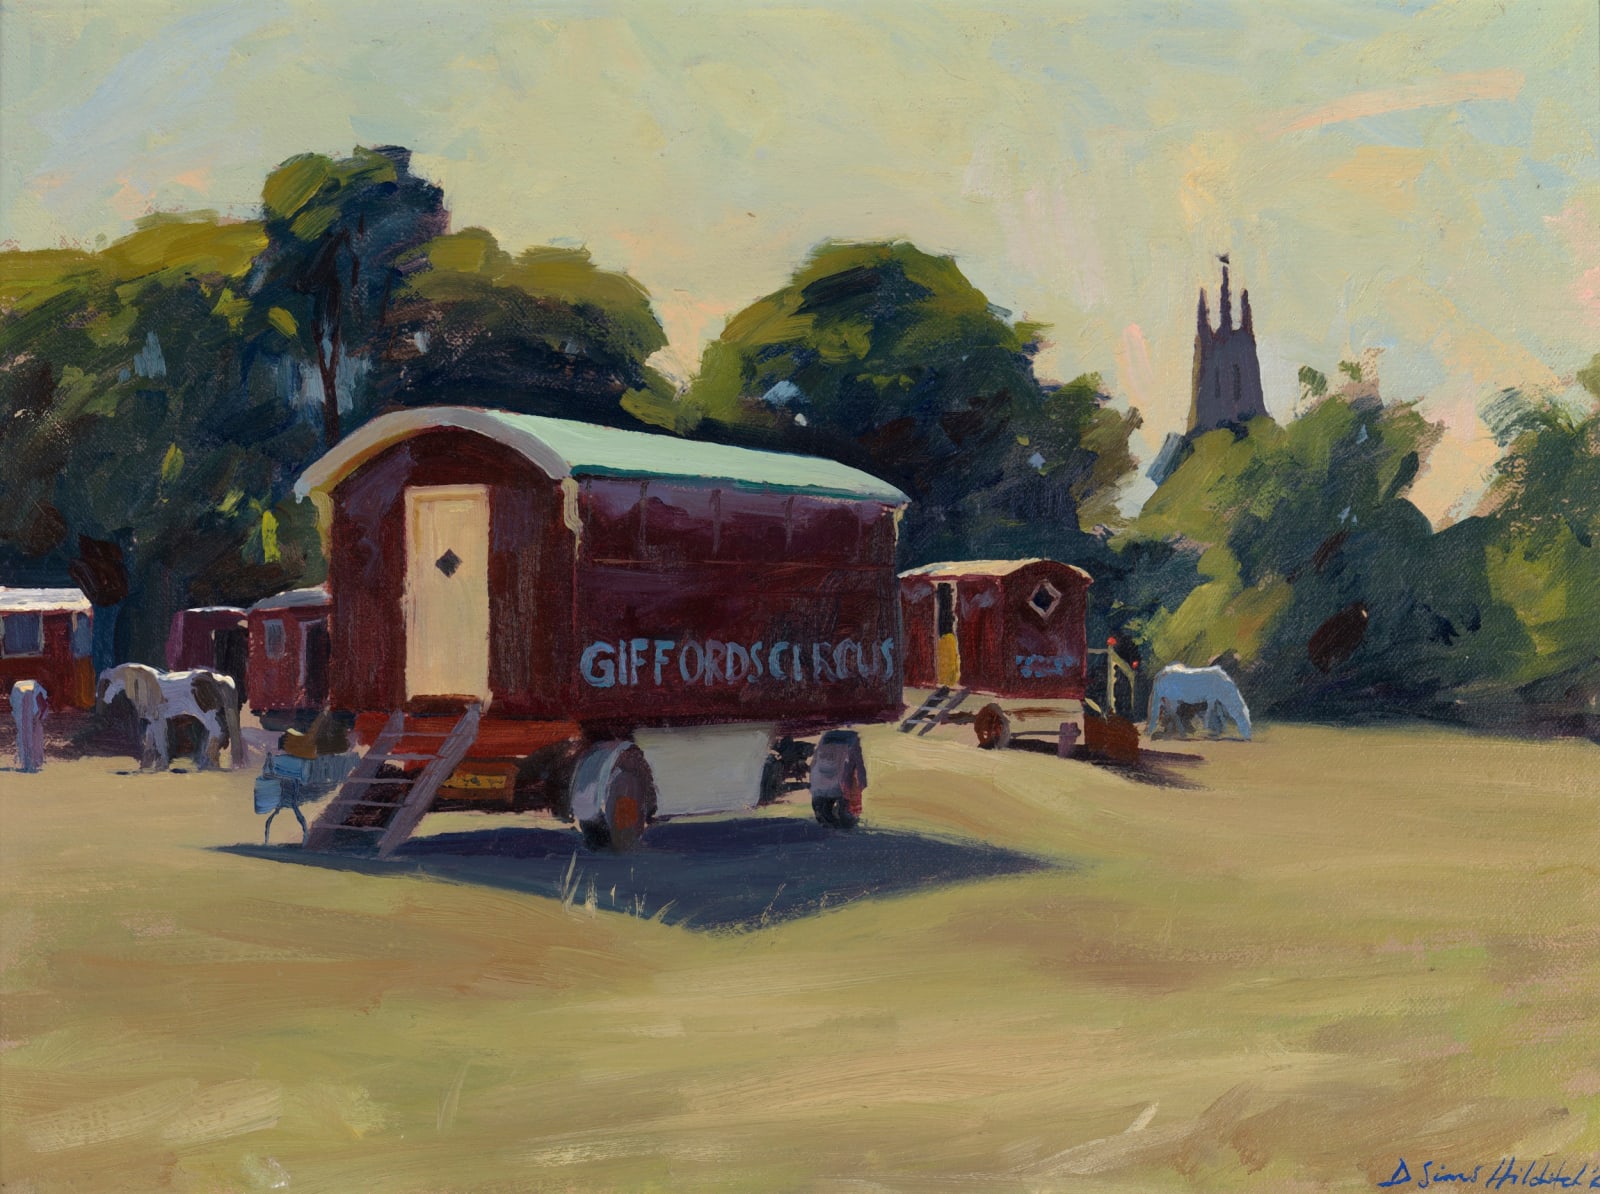 Daisy Sims Hilditch, Early morning light, ponies grazing at Gifford's Circus, 2022